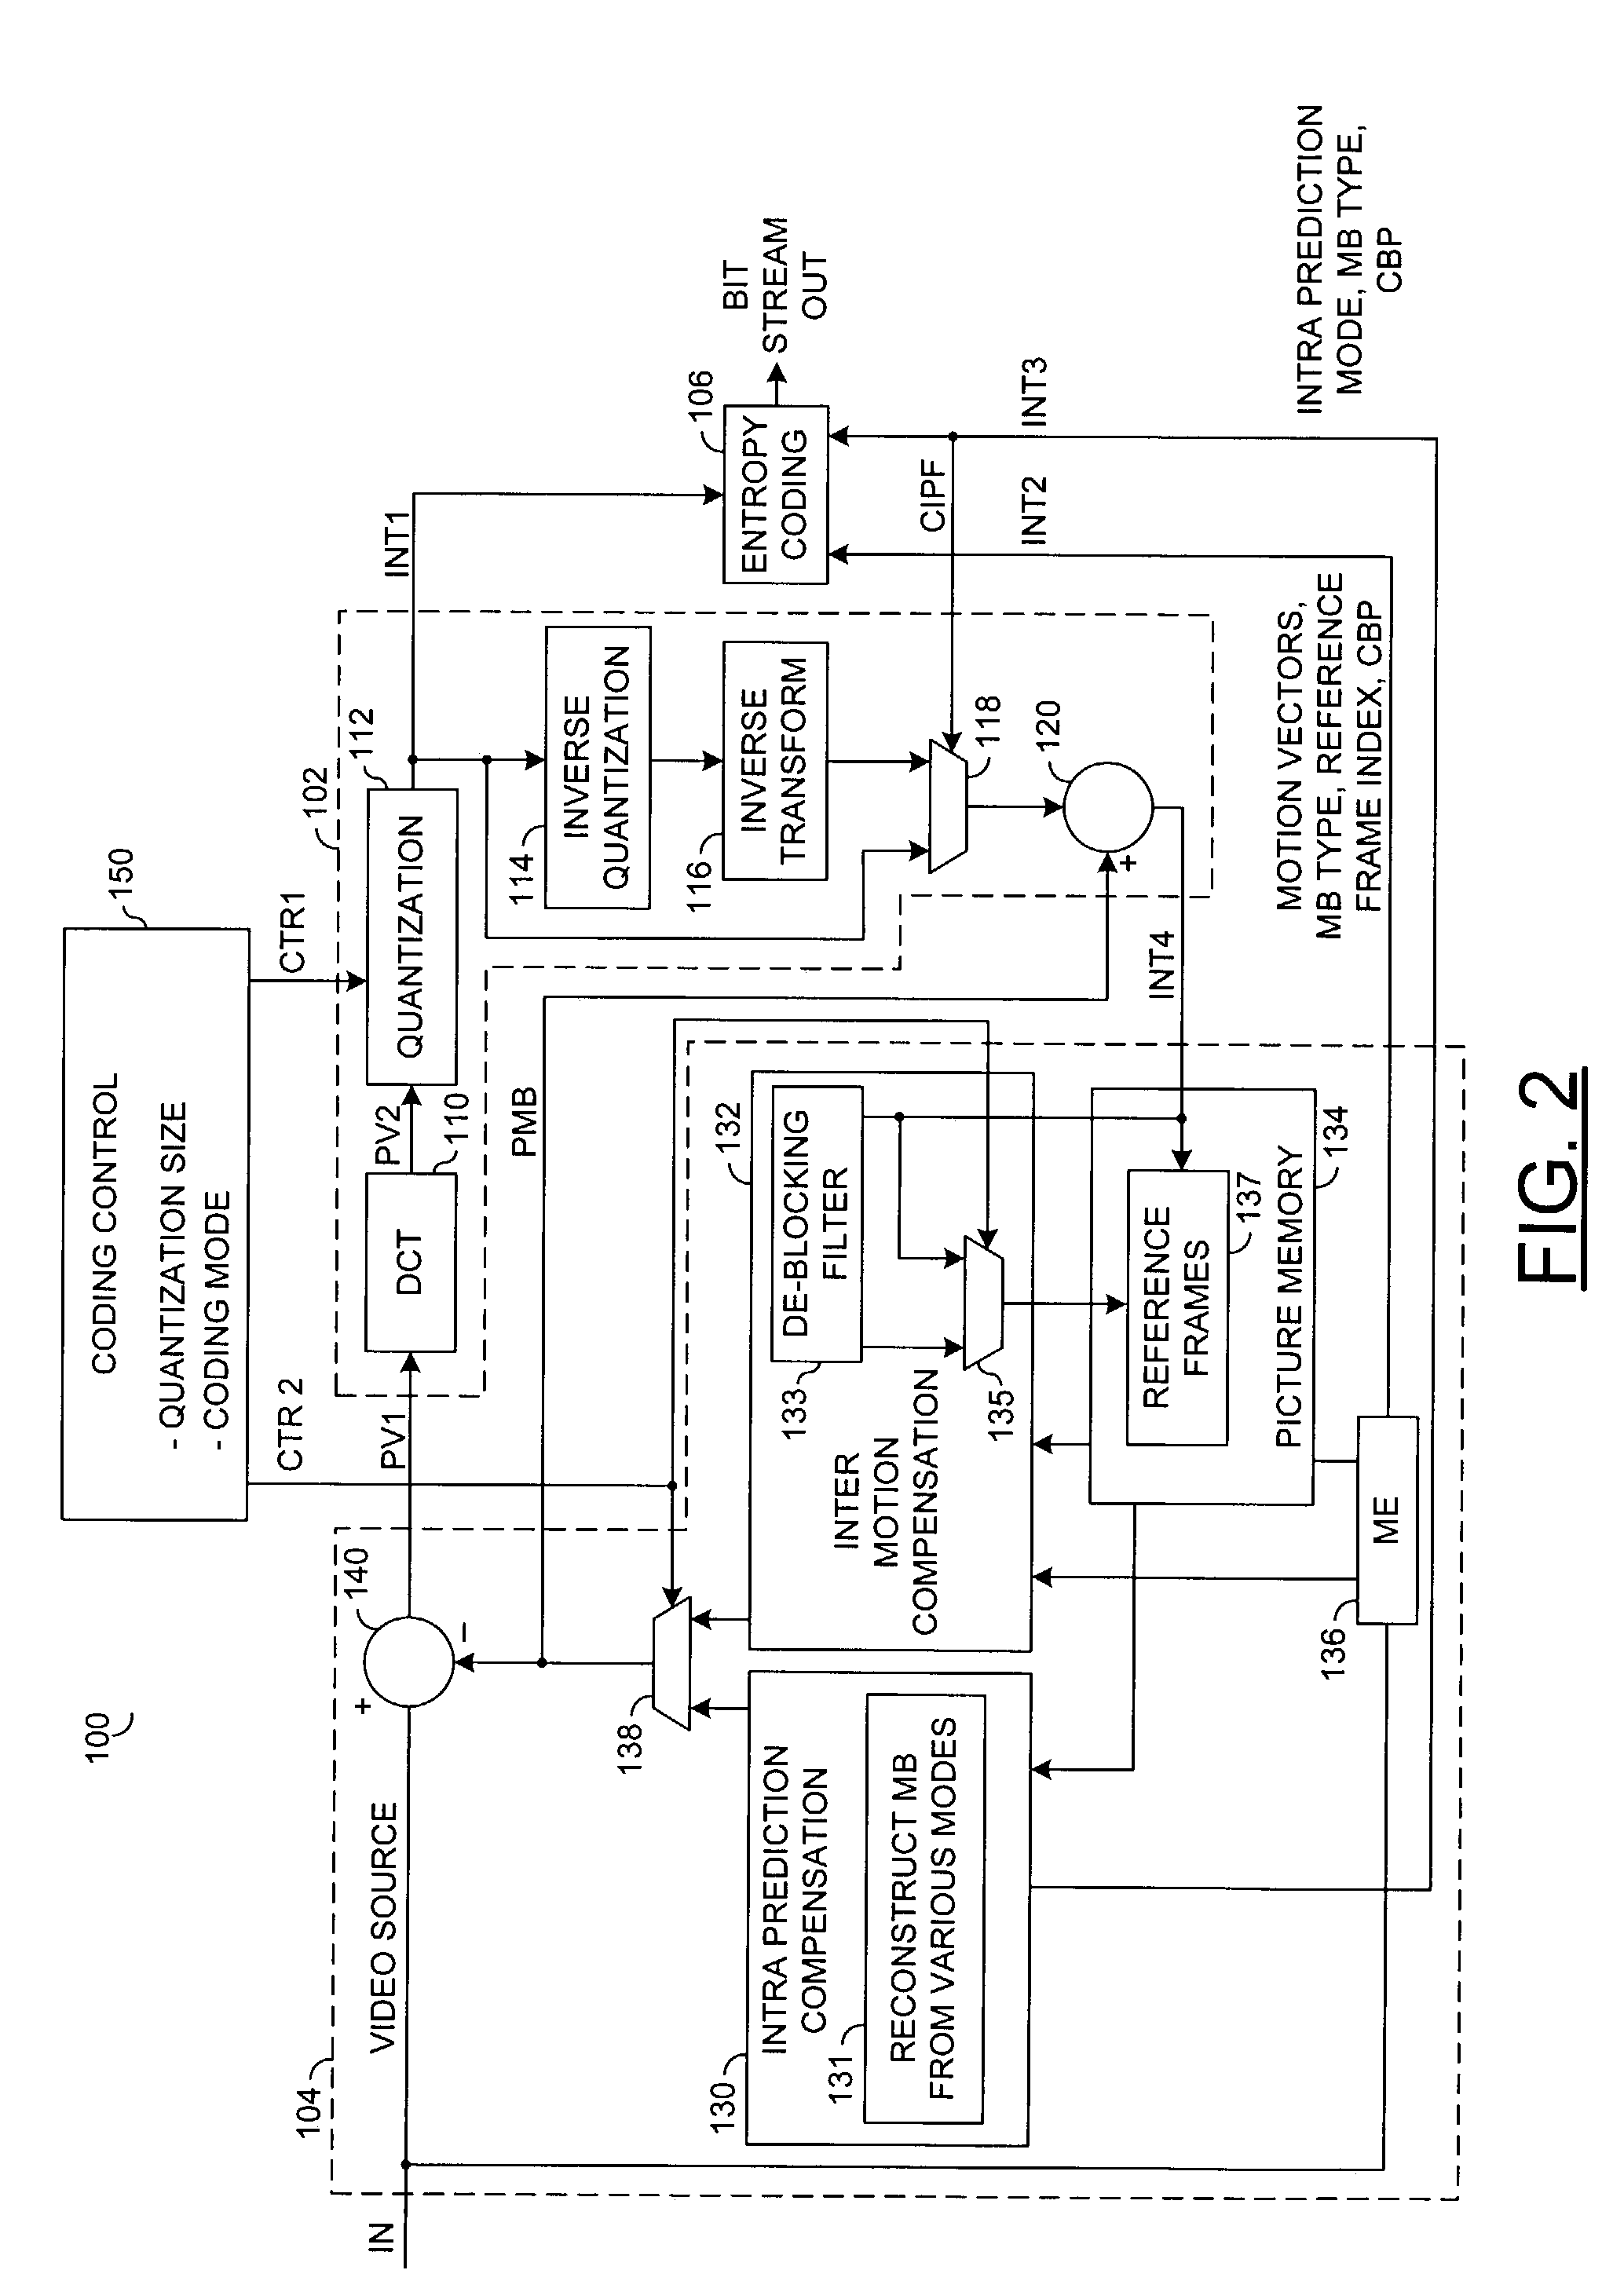 Method and/or apparatus for reducing the complexity of H.264 B-frame encoding using selective reconstruction